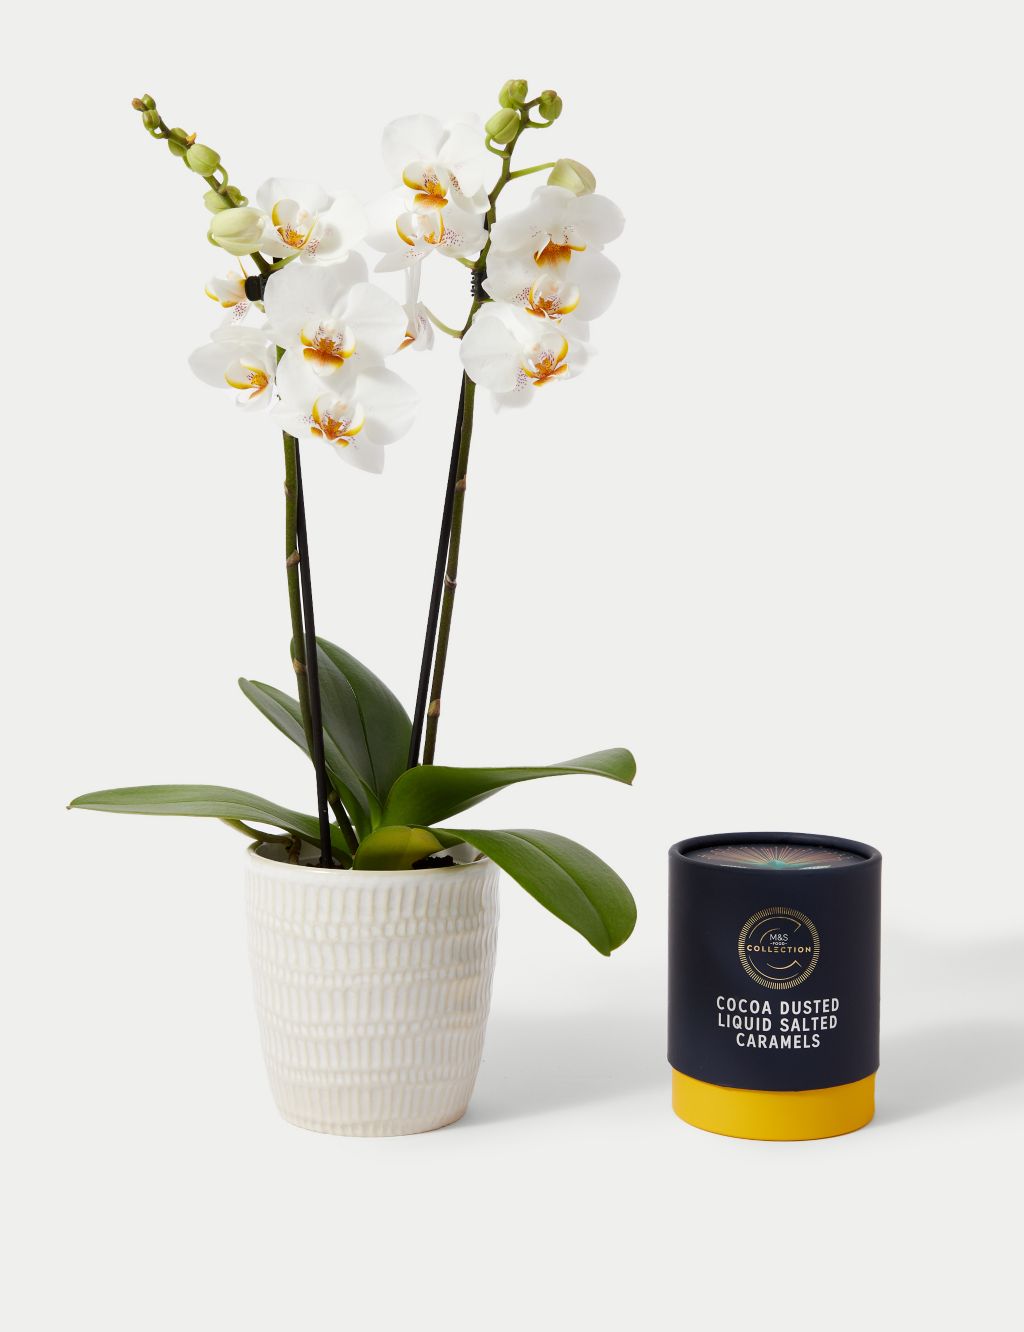 Miniature White Phalaenopsis Orchid Ceramic & Cocoa Dusted Liquid Salted Caramels Bundle